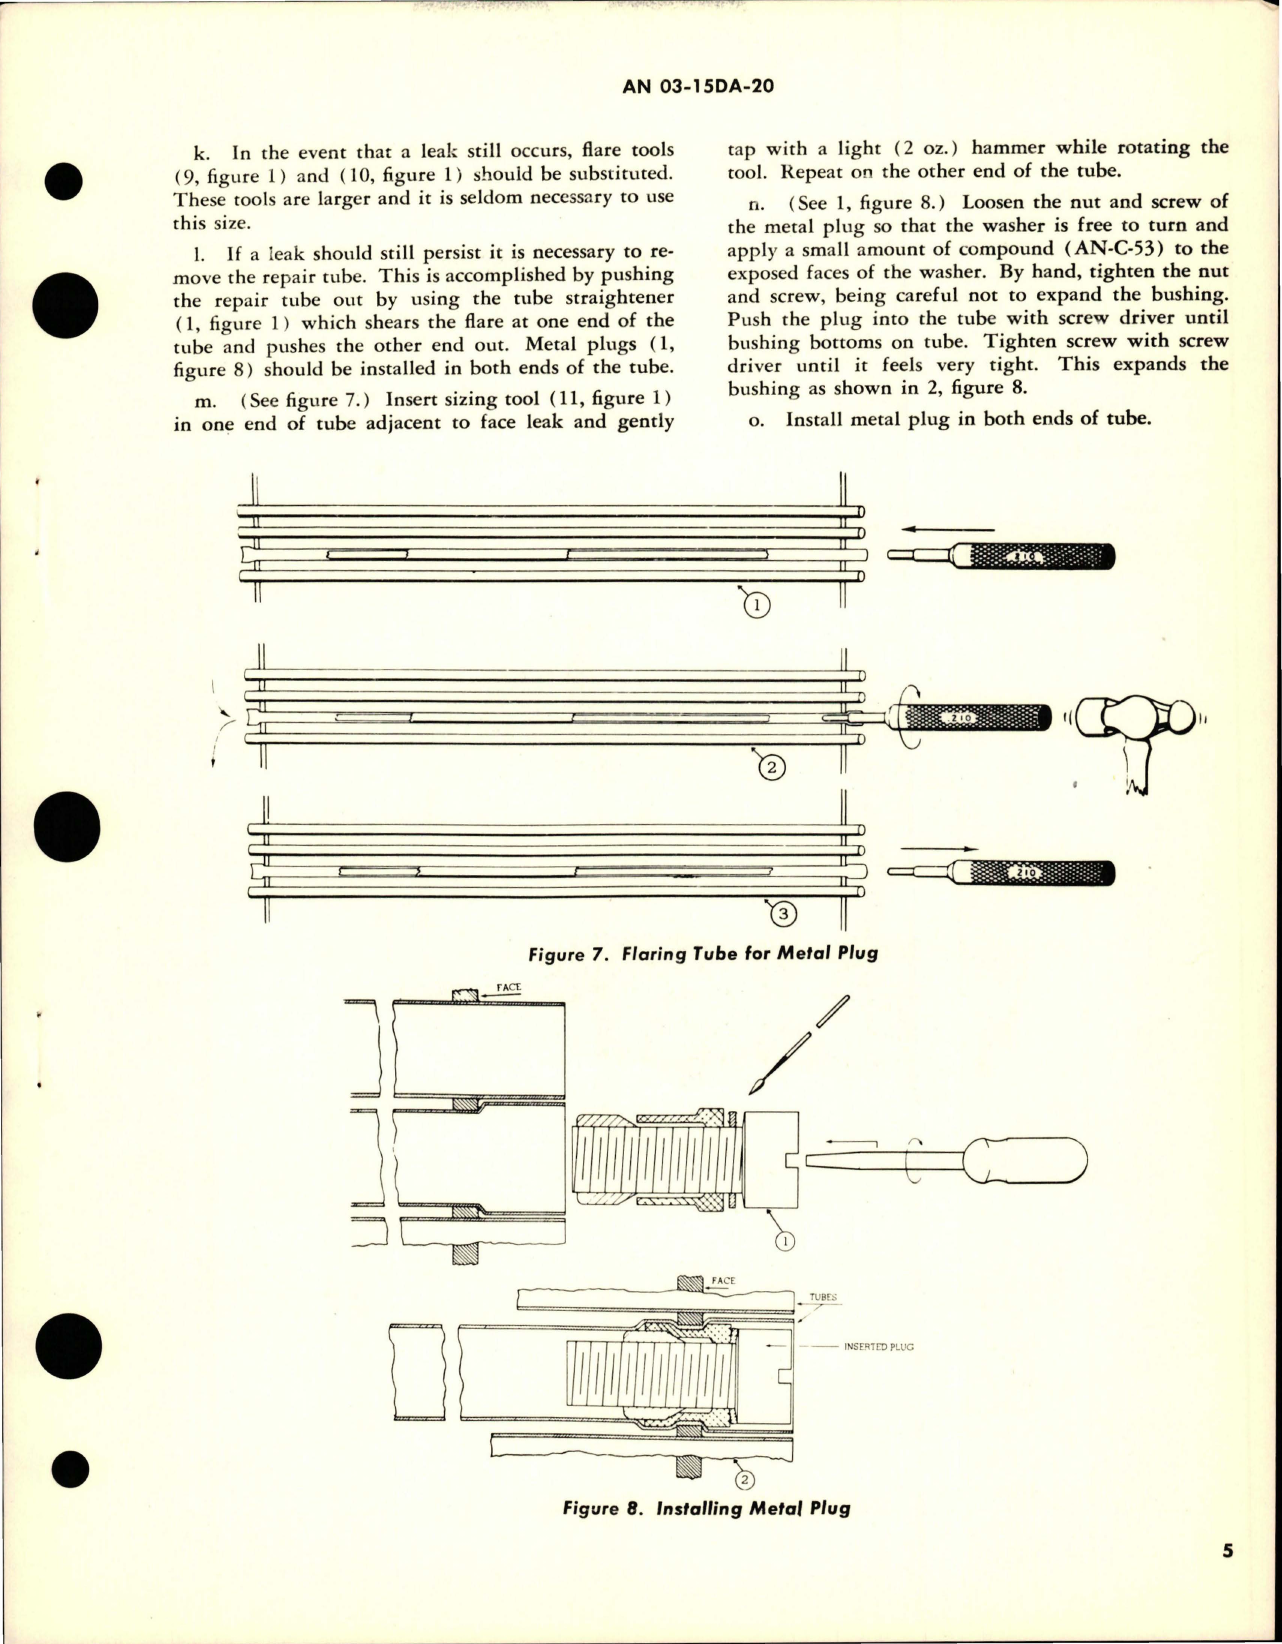 Sample page 5 from AirCorps Library document: Overhaul Instructions with Parts Breakdown for Oil Cooler - Part 52087